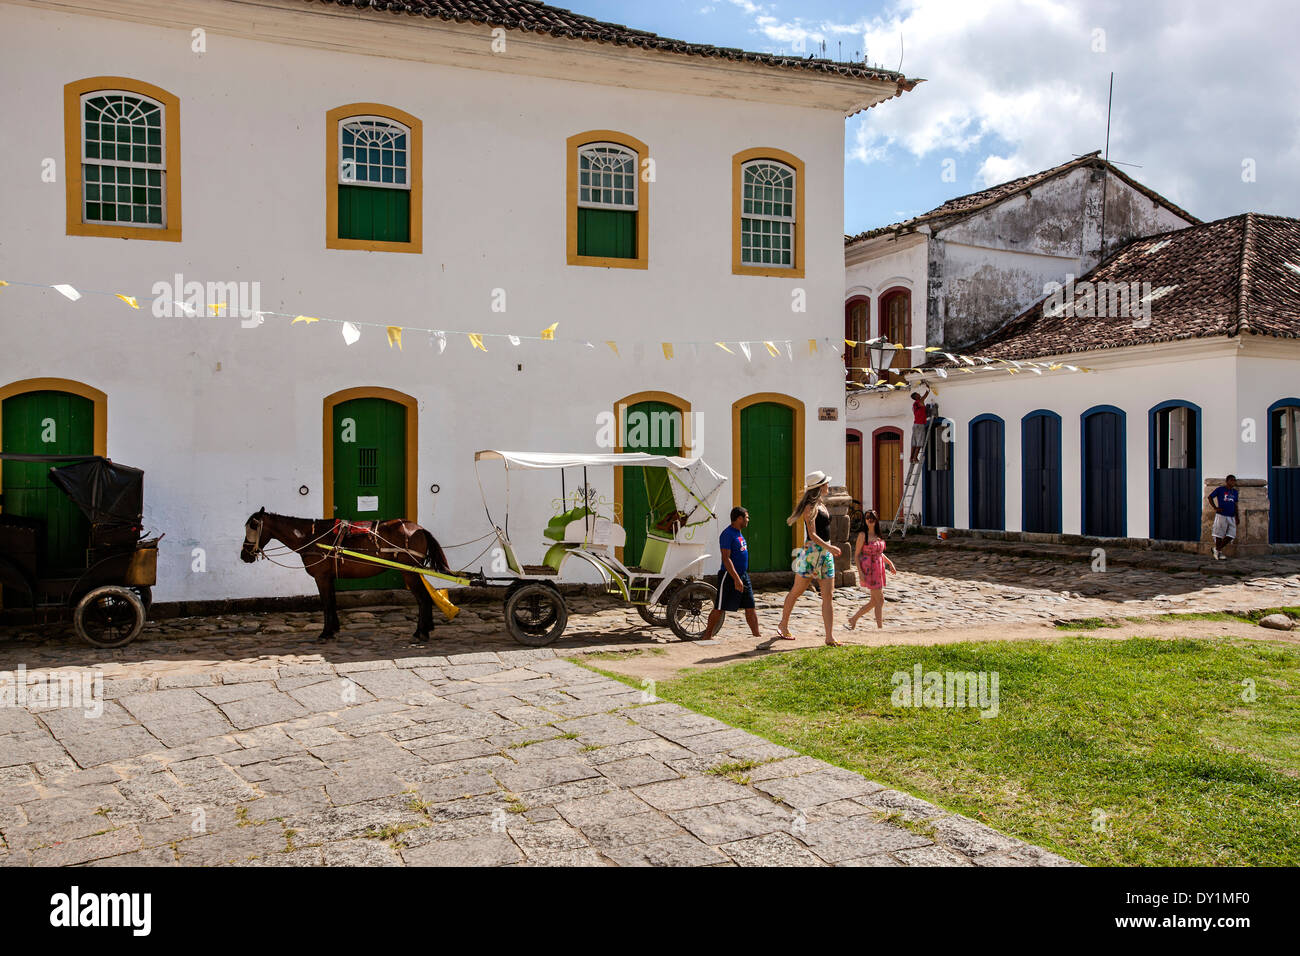 Paraty, colonial town, typical colonial houses, horse cart with tourists, Rio de Janeiro, Costa Verde, Brazil Stock Photo